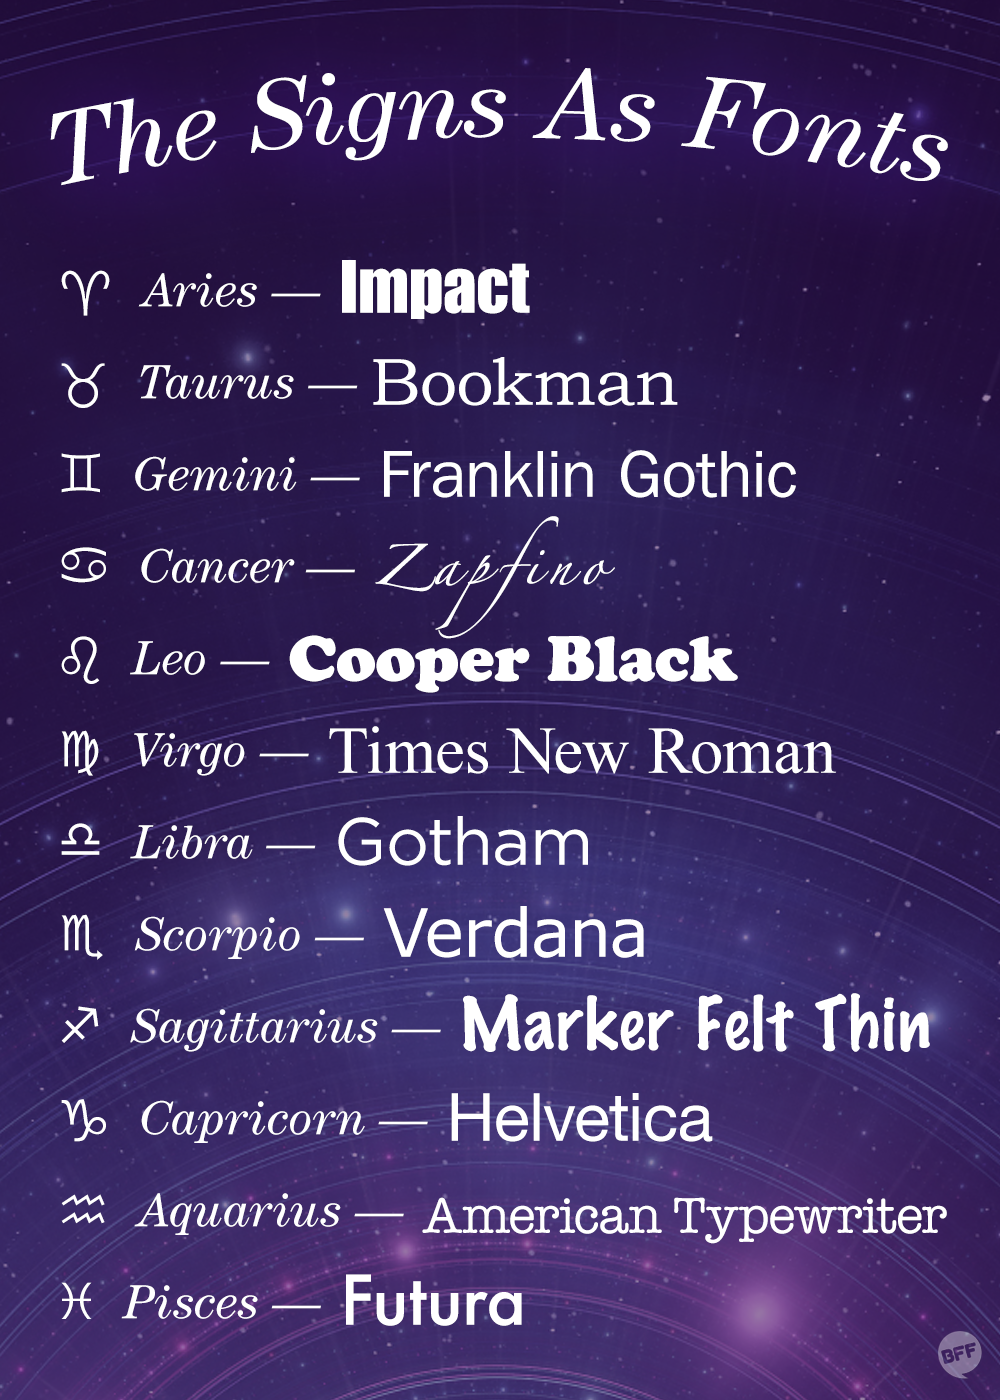 Buzzfeed Bff The Signs As Fonts A Definitive Guide To